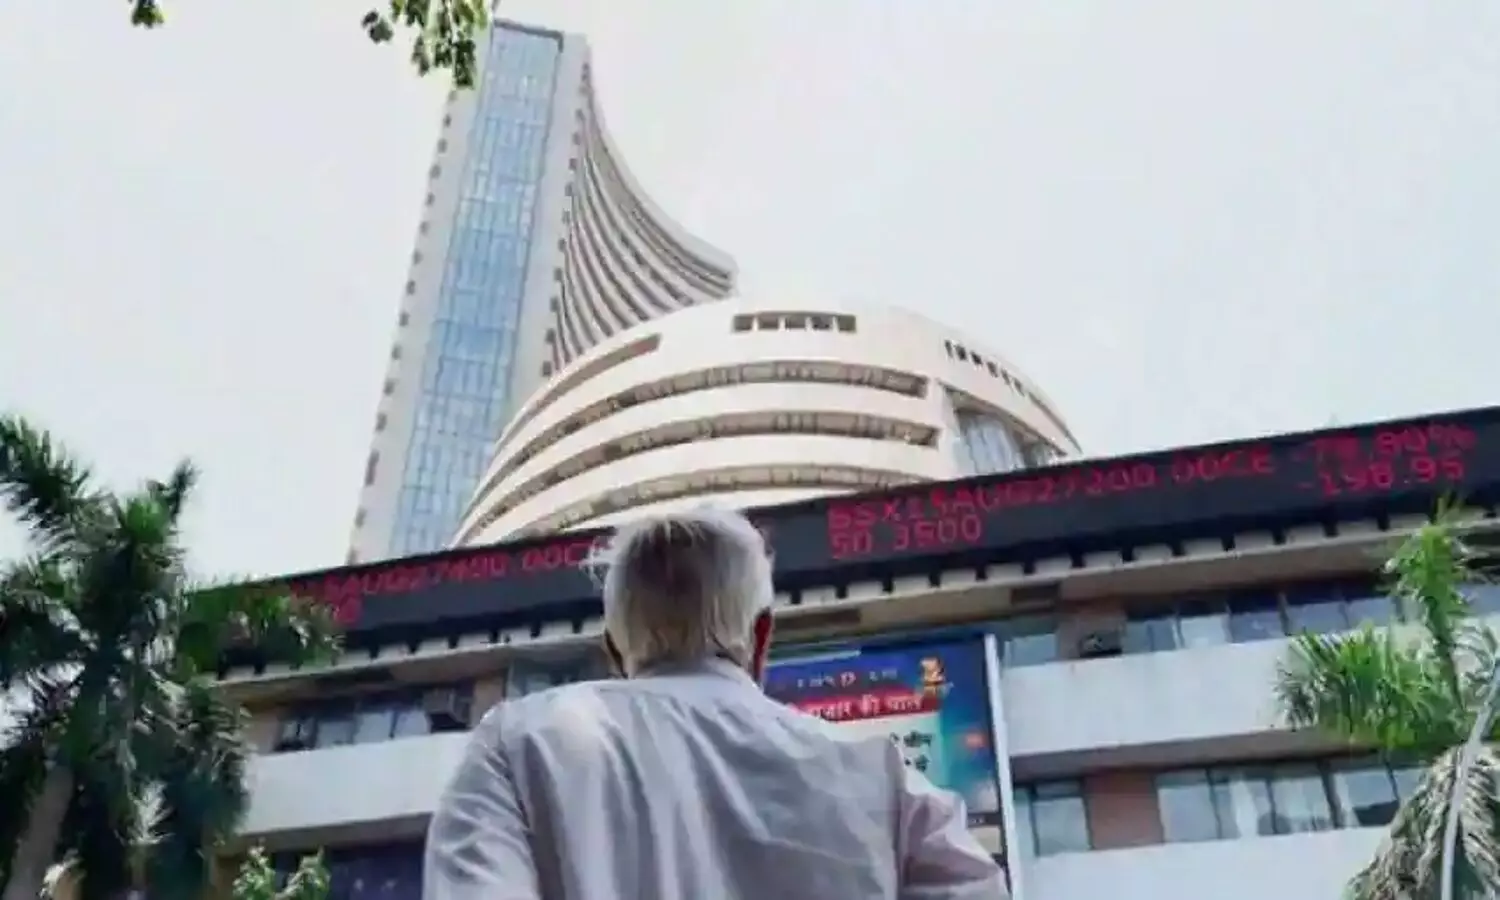 share market today 22 march 2022 live update india bse sensex nse nifty business economy newstrack